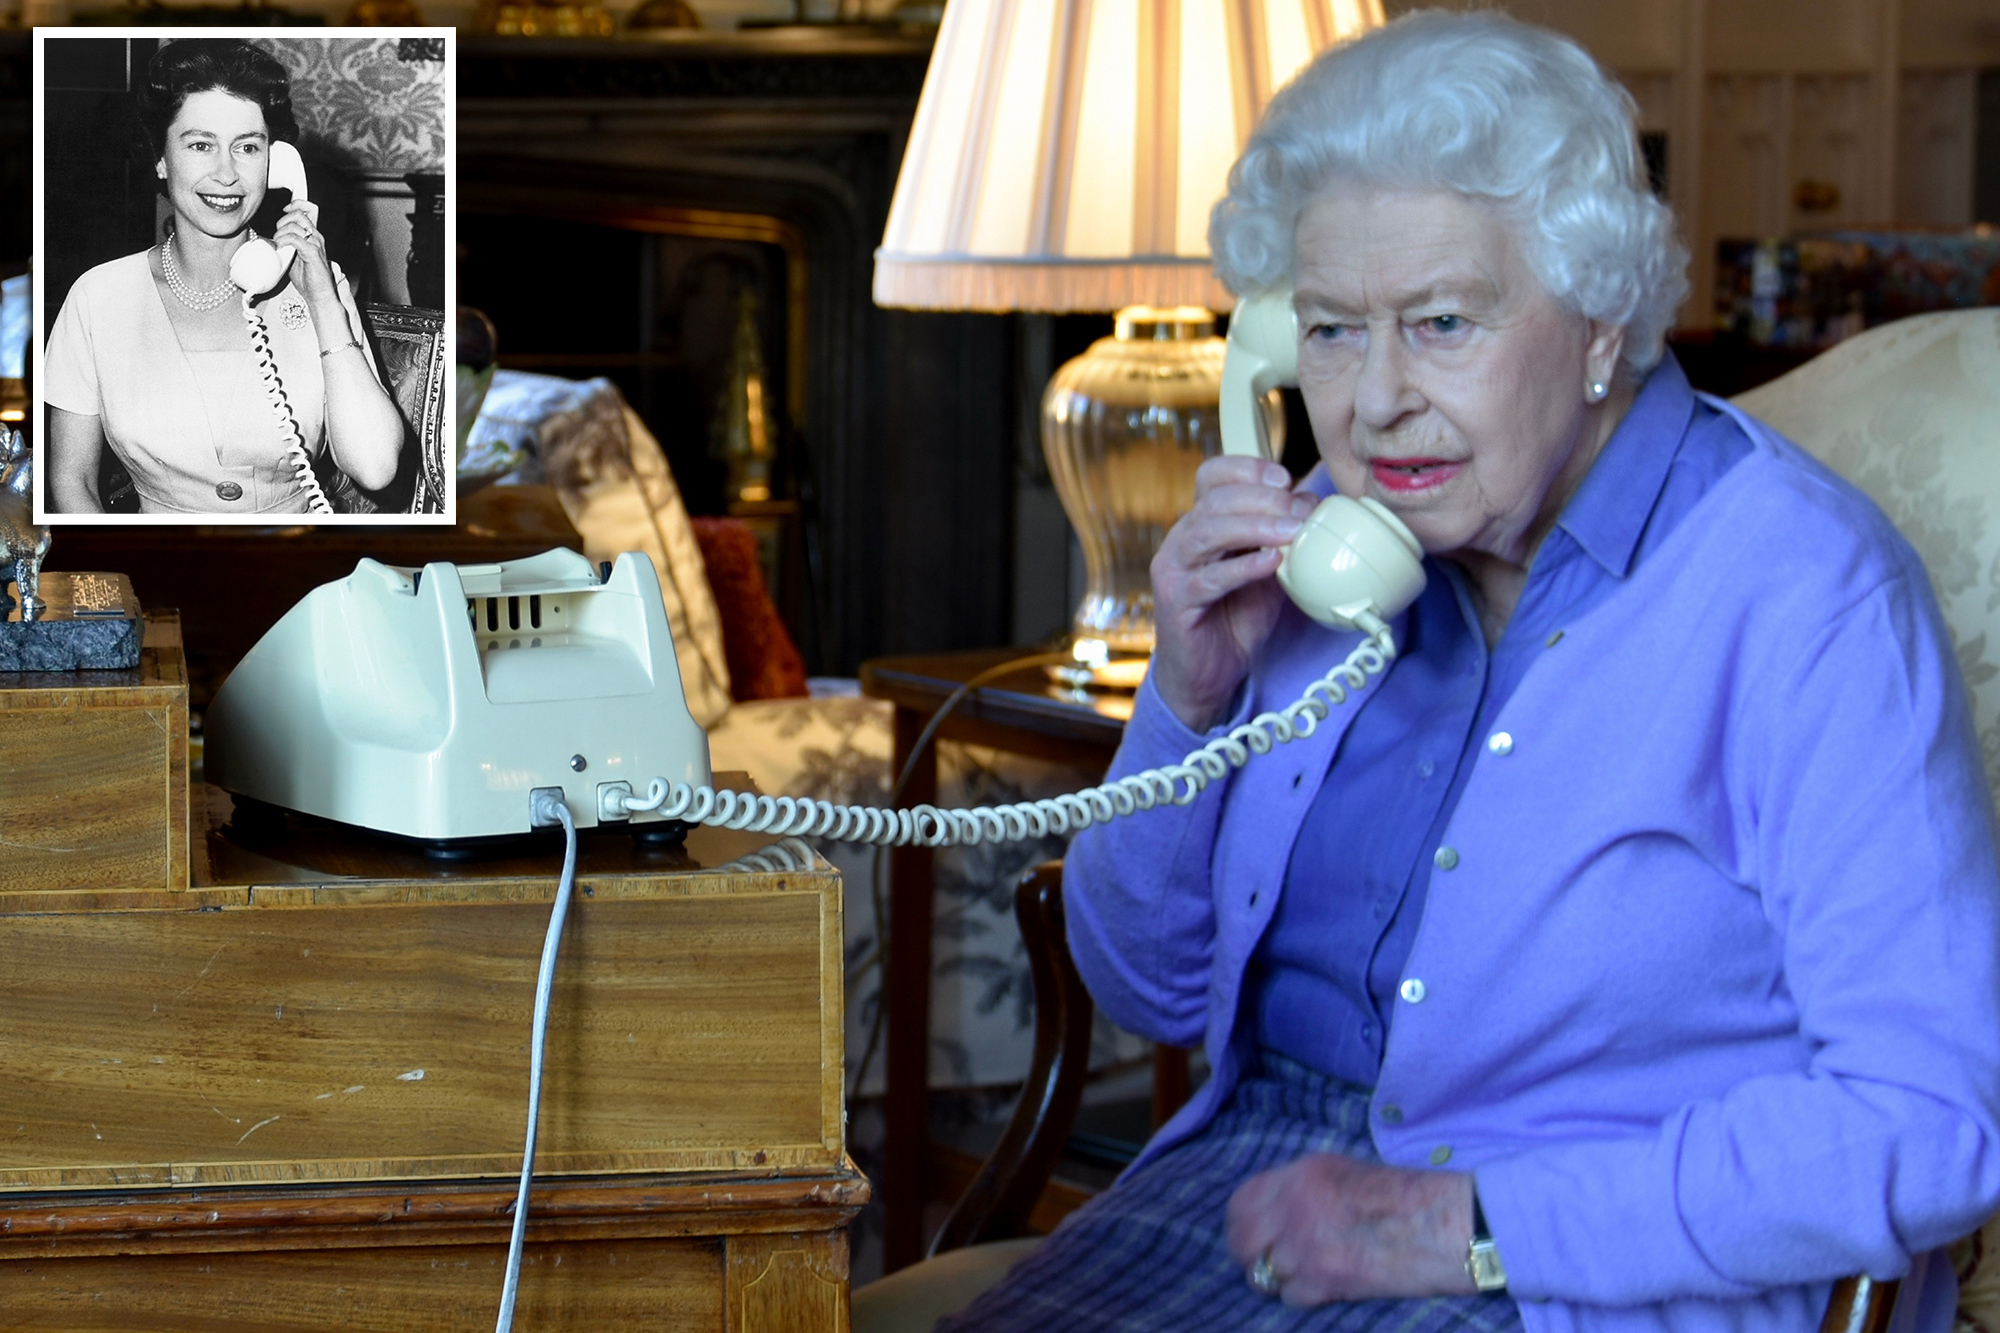 Queen Elizabeth will finest get rid of up the mobile phone for these two of us inside The Agency